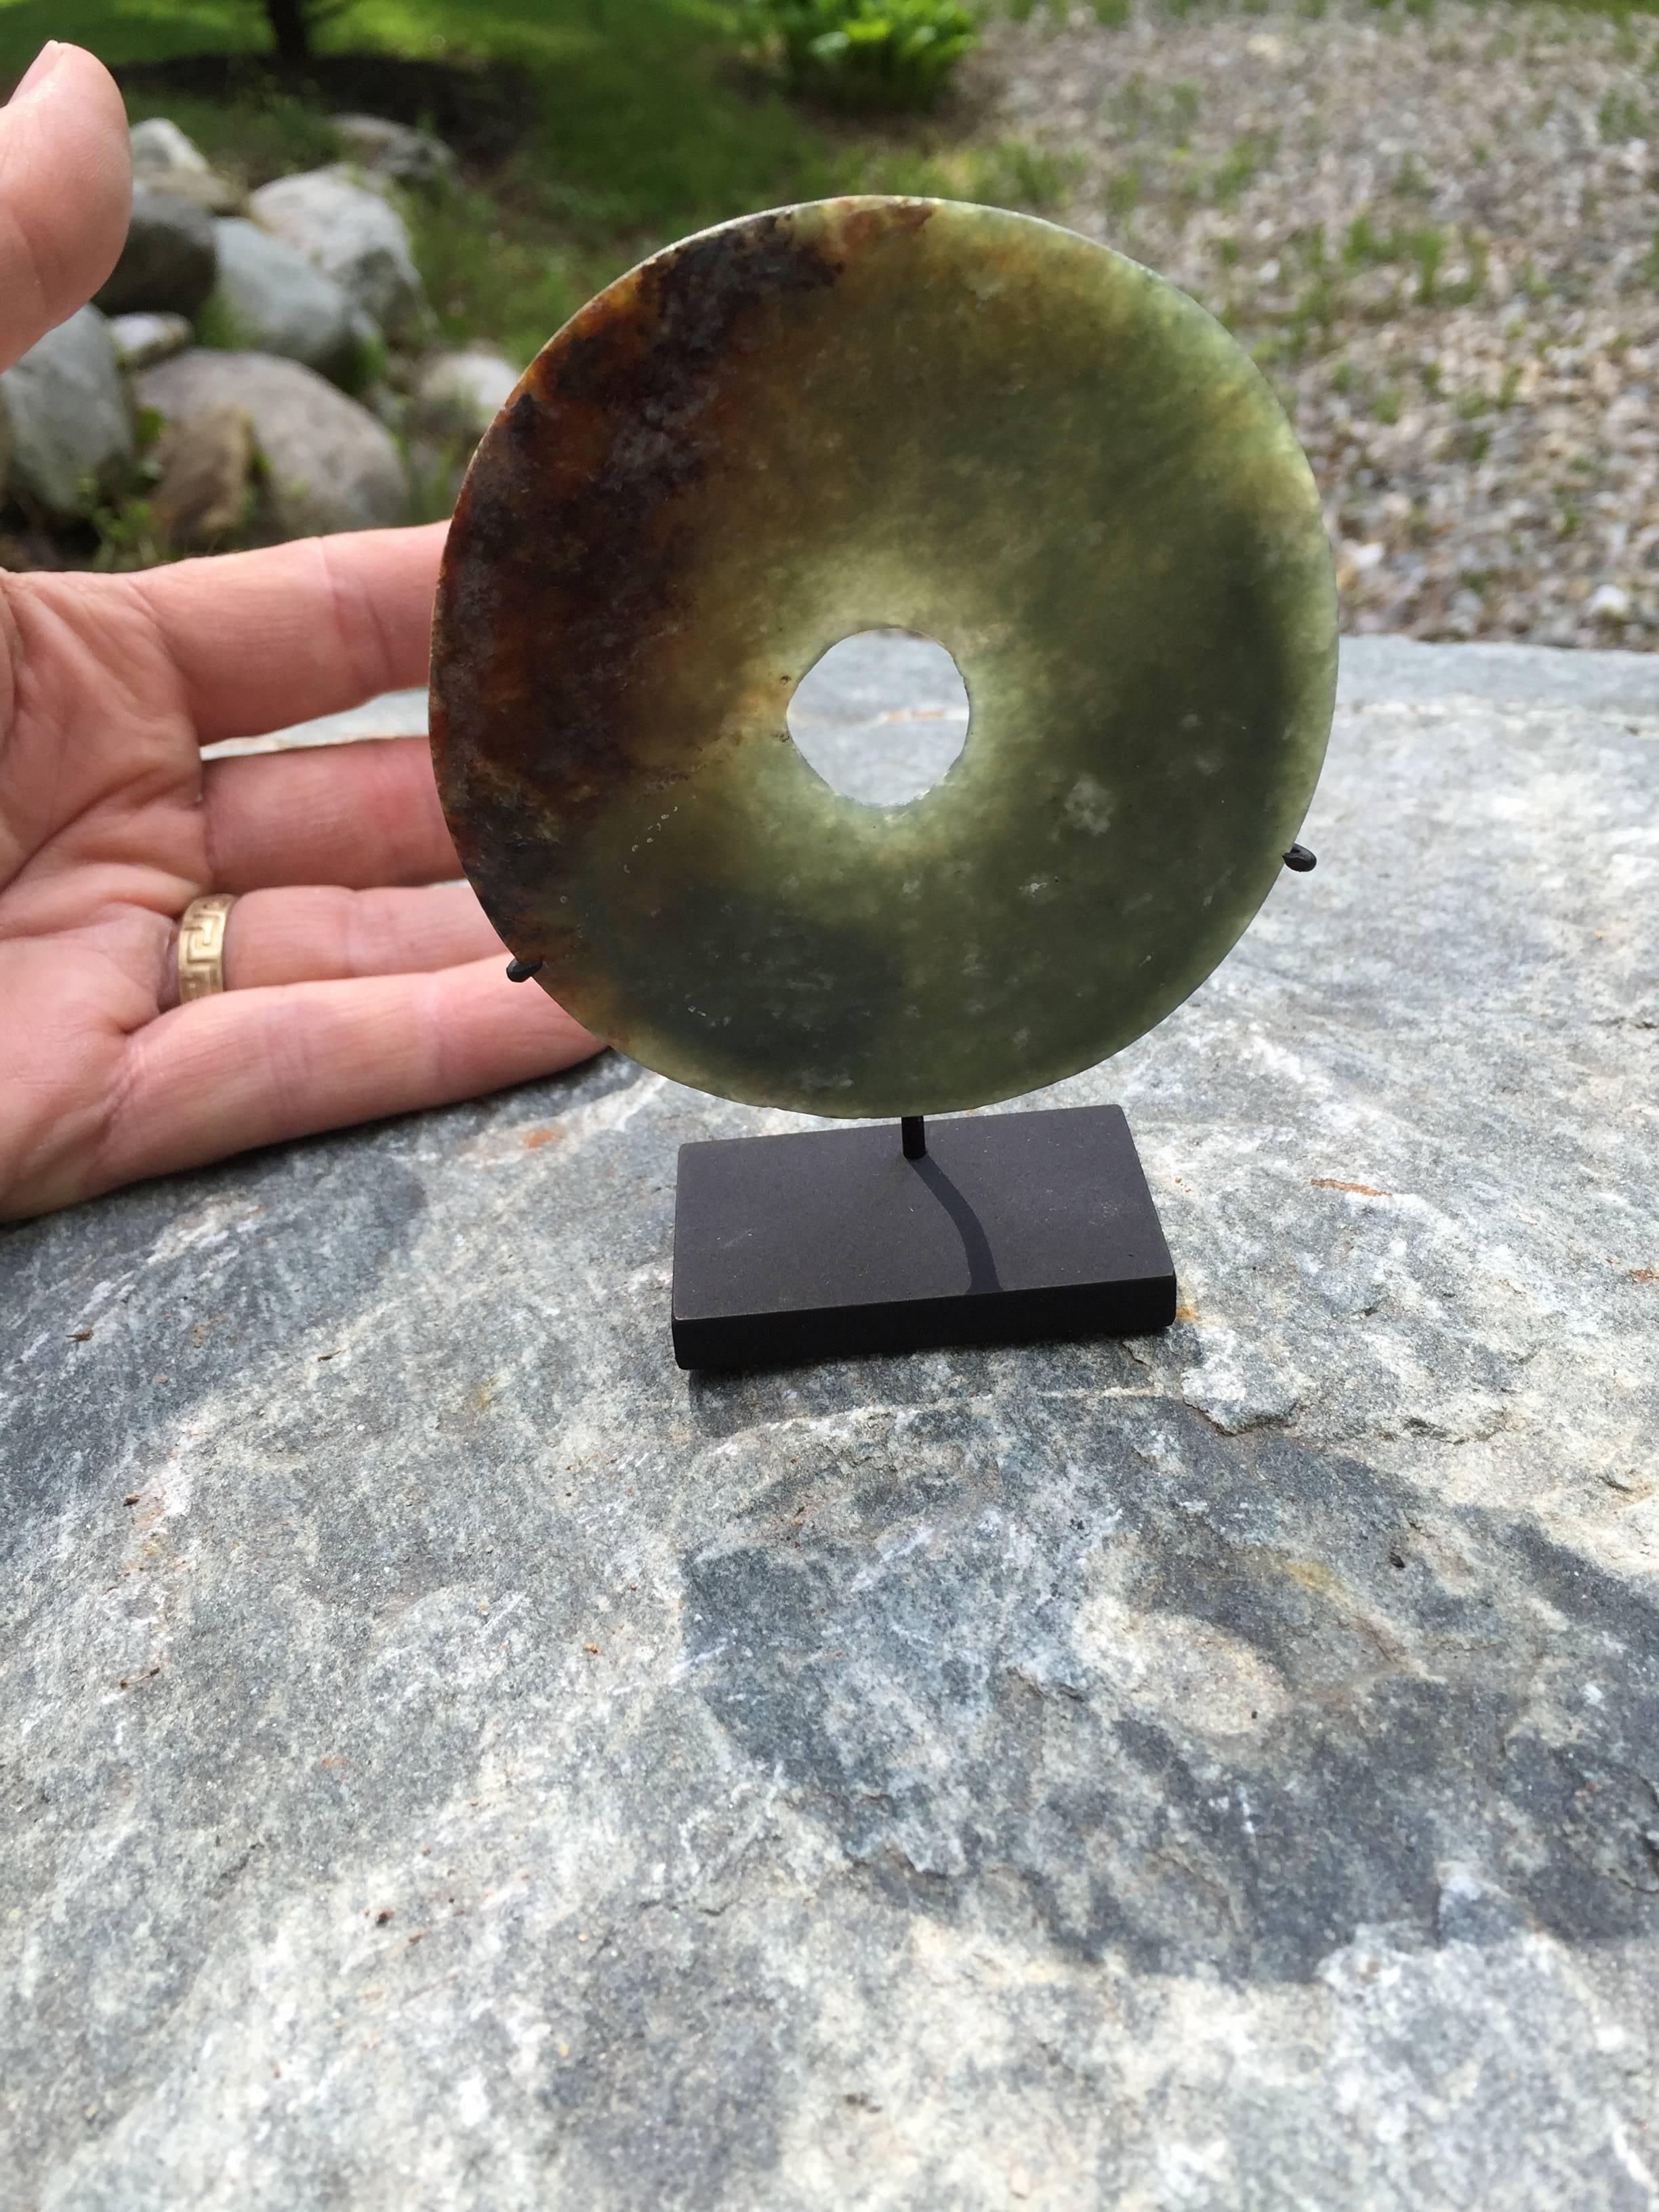 This is an authentic ancient Jade bi disc (3